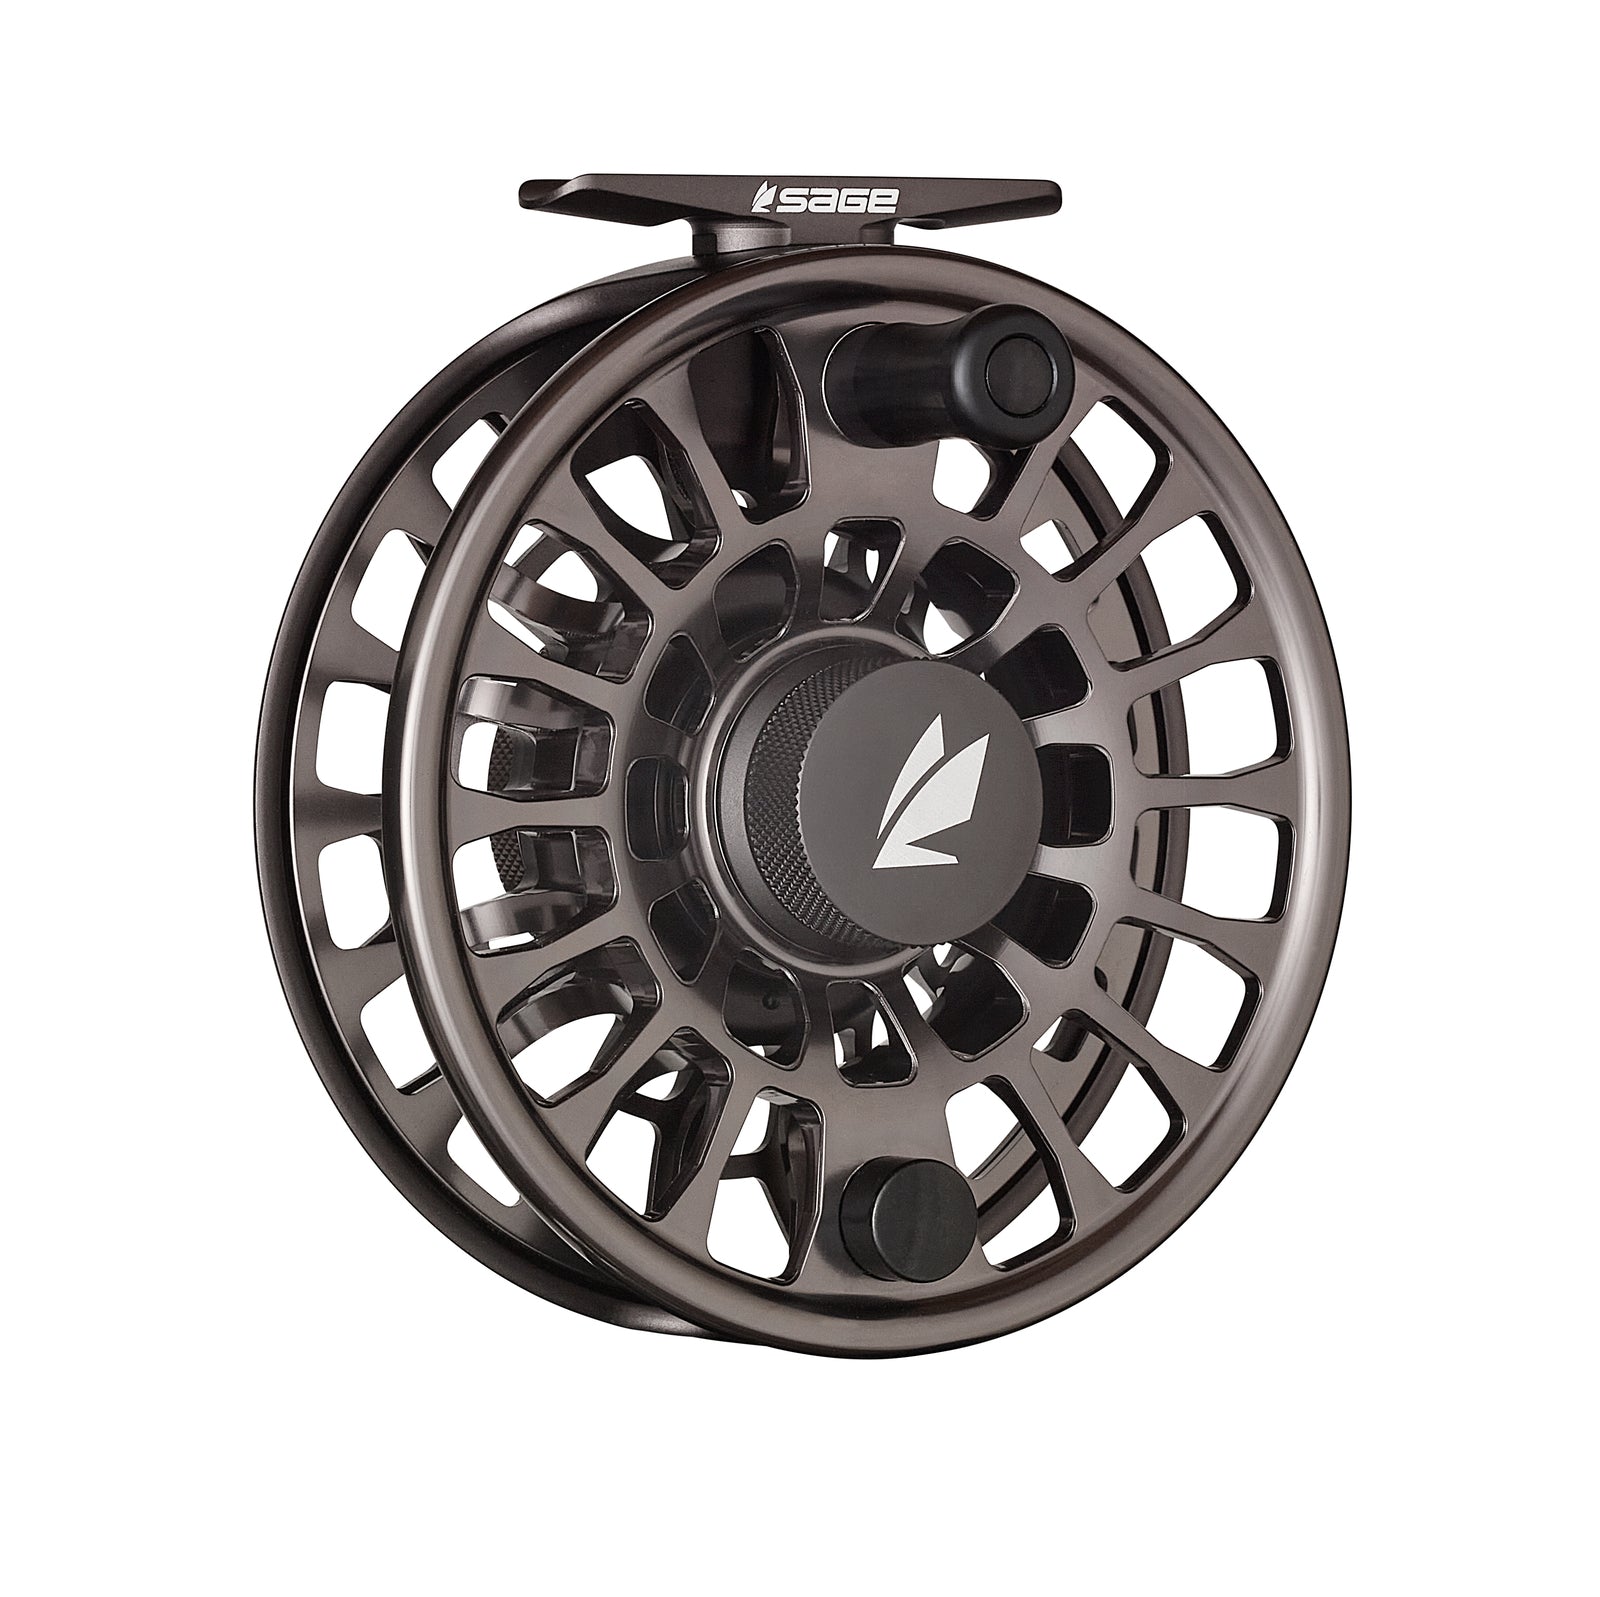 Domain Stealth #9/10 Salmon Fly Reel - As New